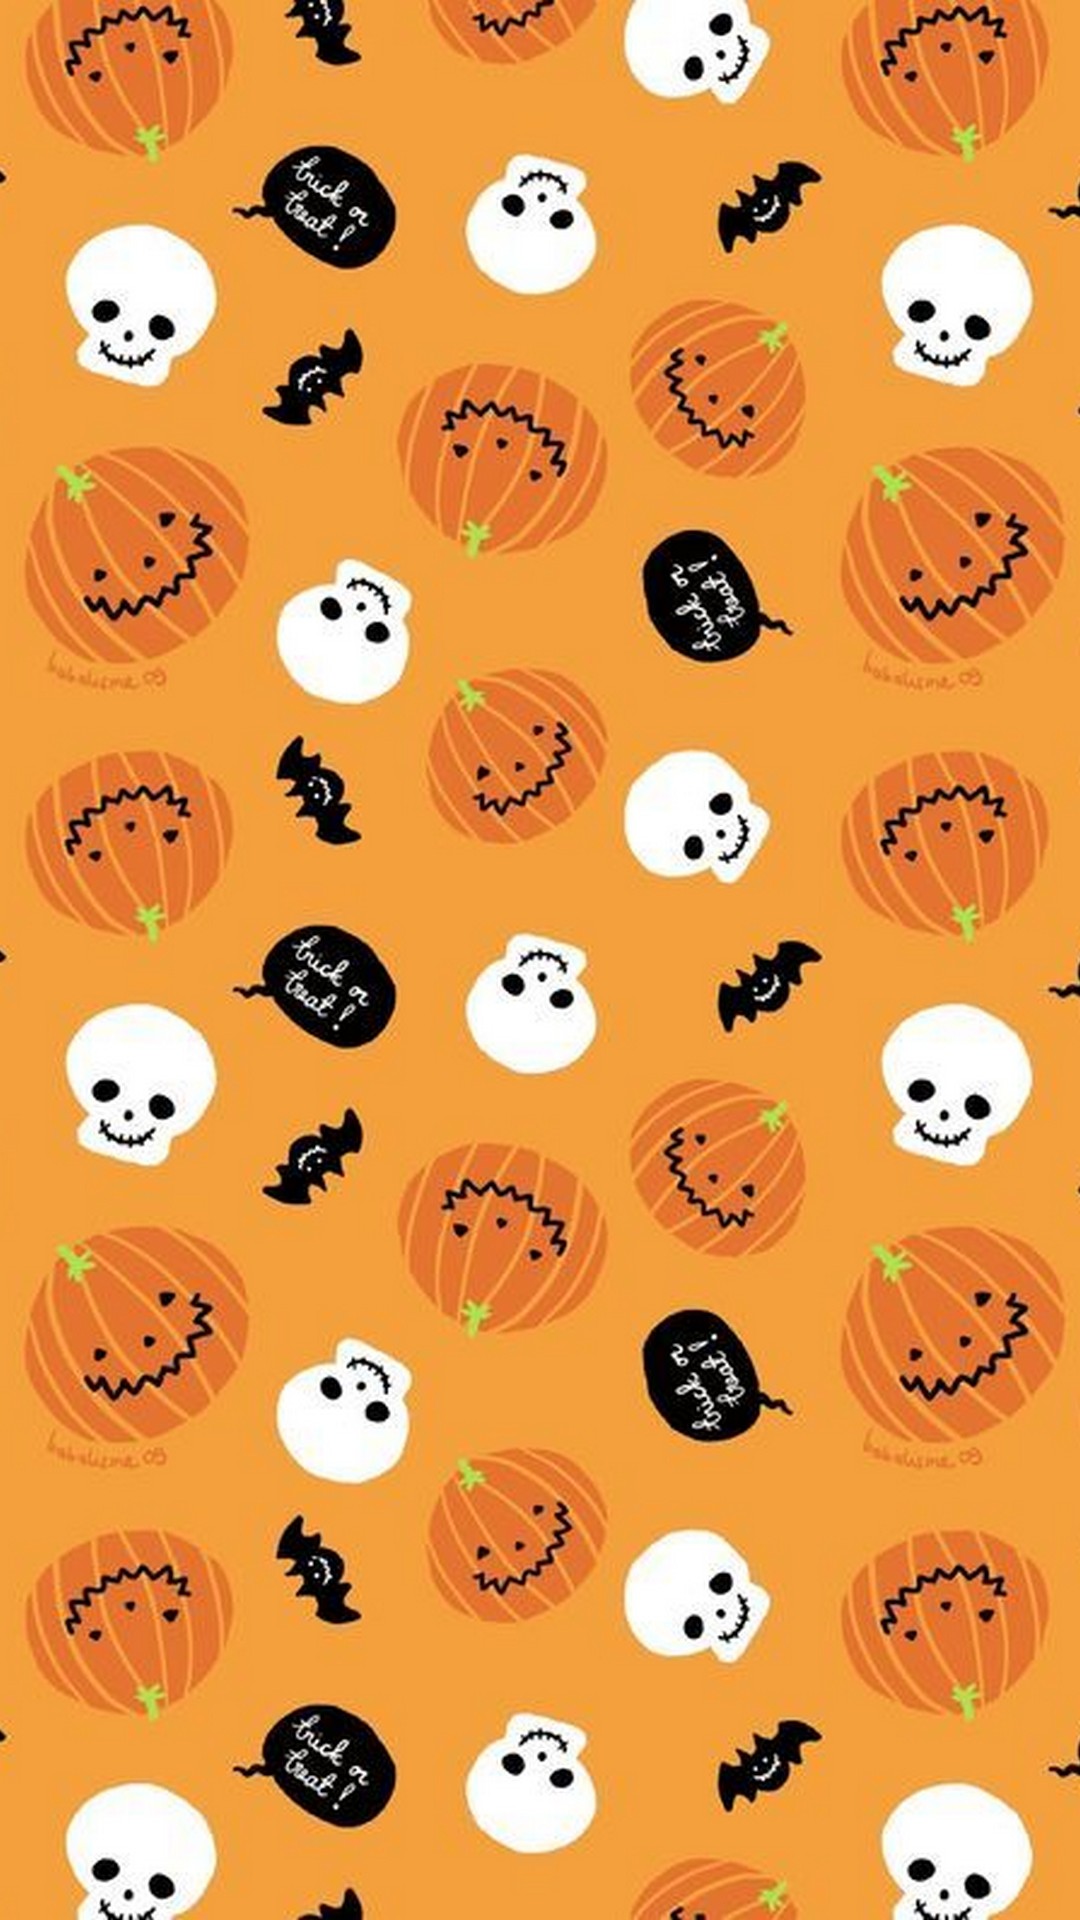 Cute Halloween iPhone X Wallpaper With high-resolution 1080X1920 pixel. You can use this wallpaper for your iPhone 5, 6, 7, 8, X, XS, XR backgrounds, Mobile Screensaver, or iPad Lock Screen